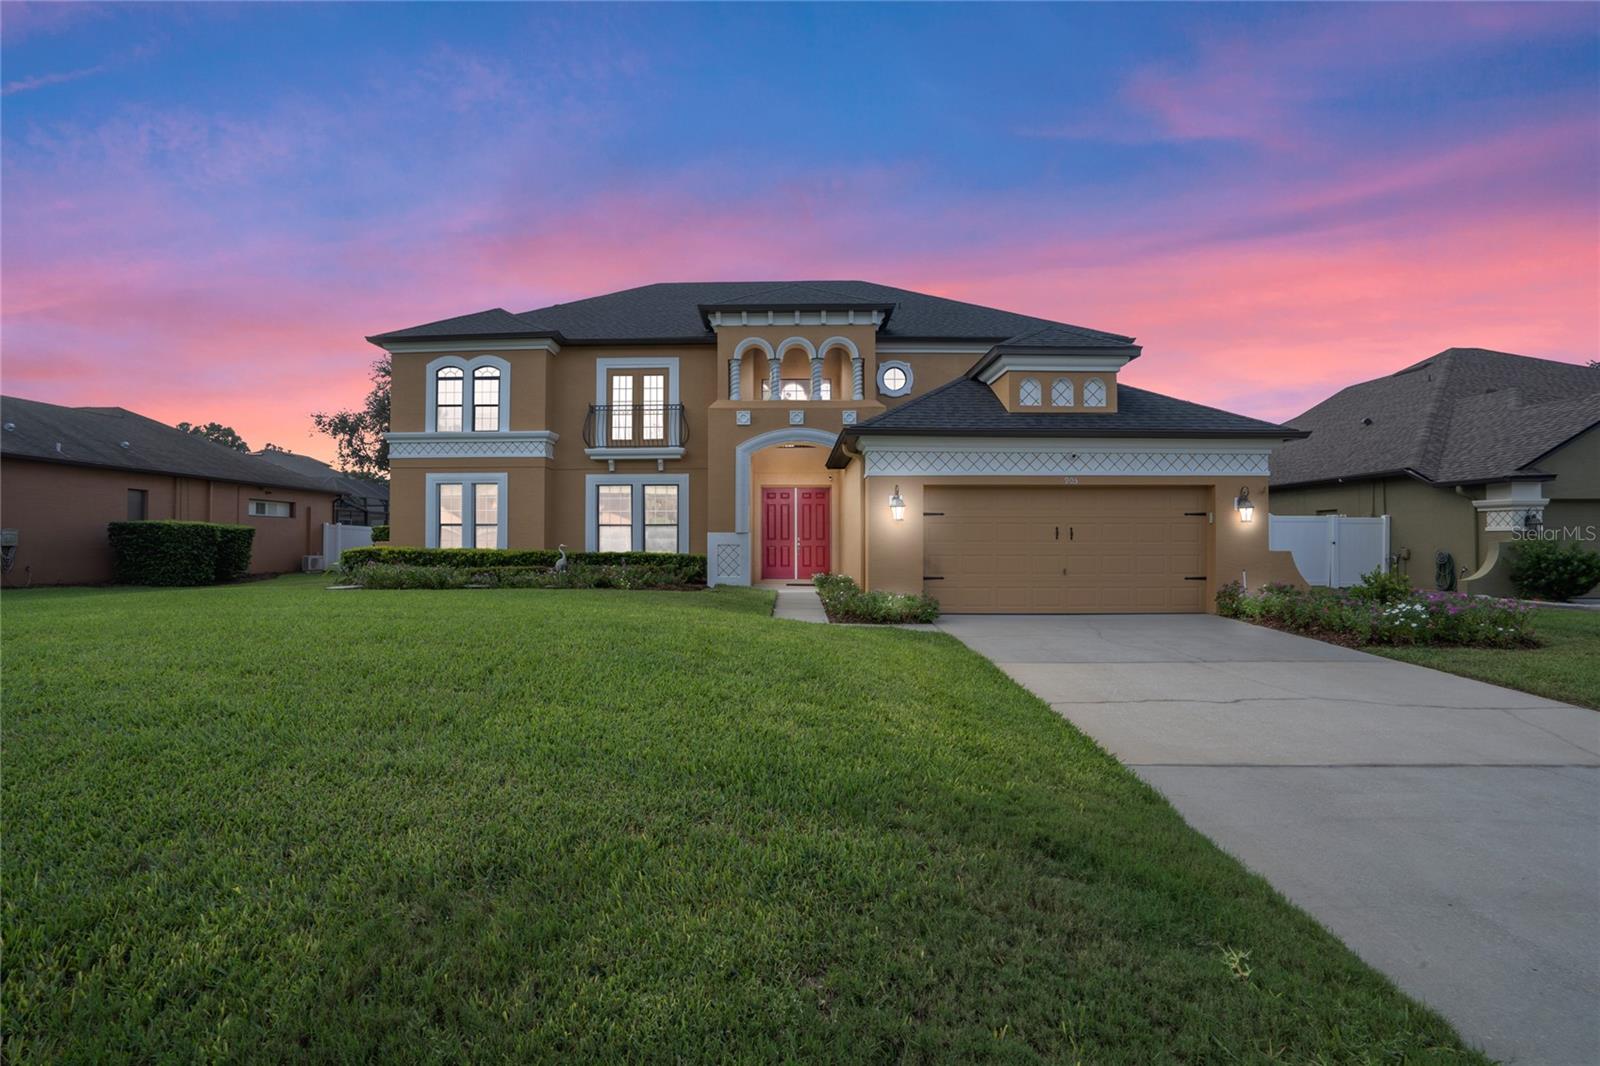 Details for 905 Country Charm Circle, OVIEDO, FL 32765